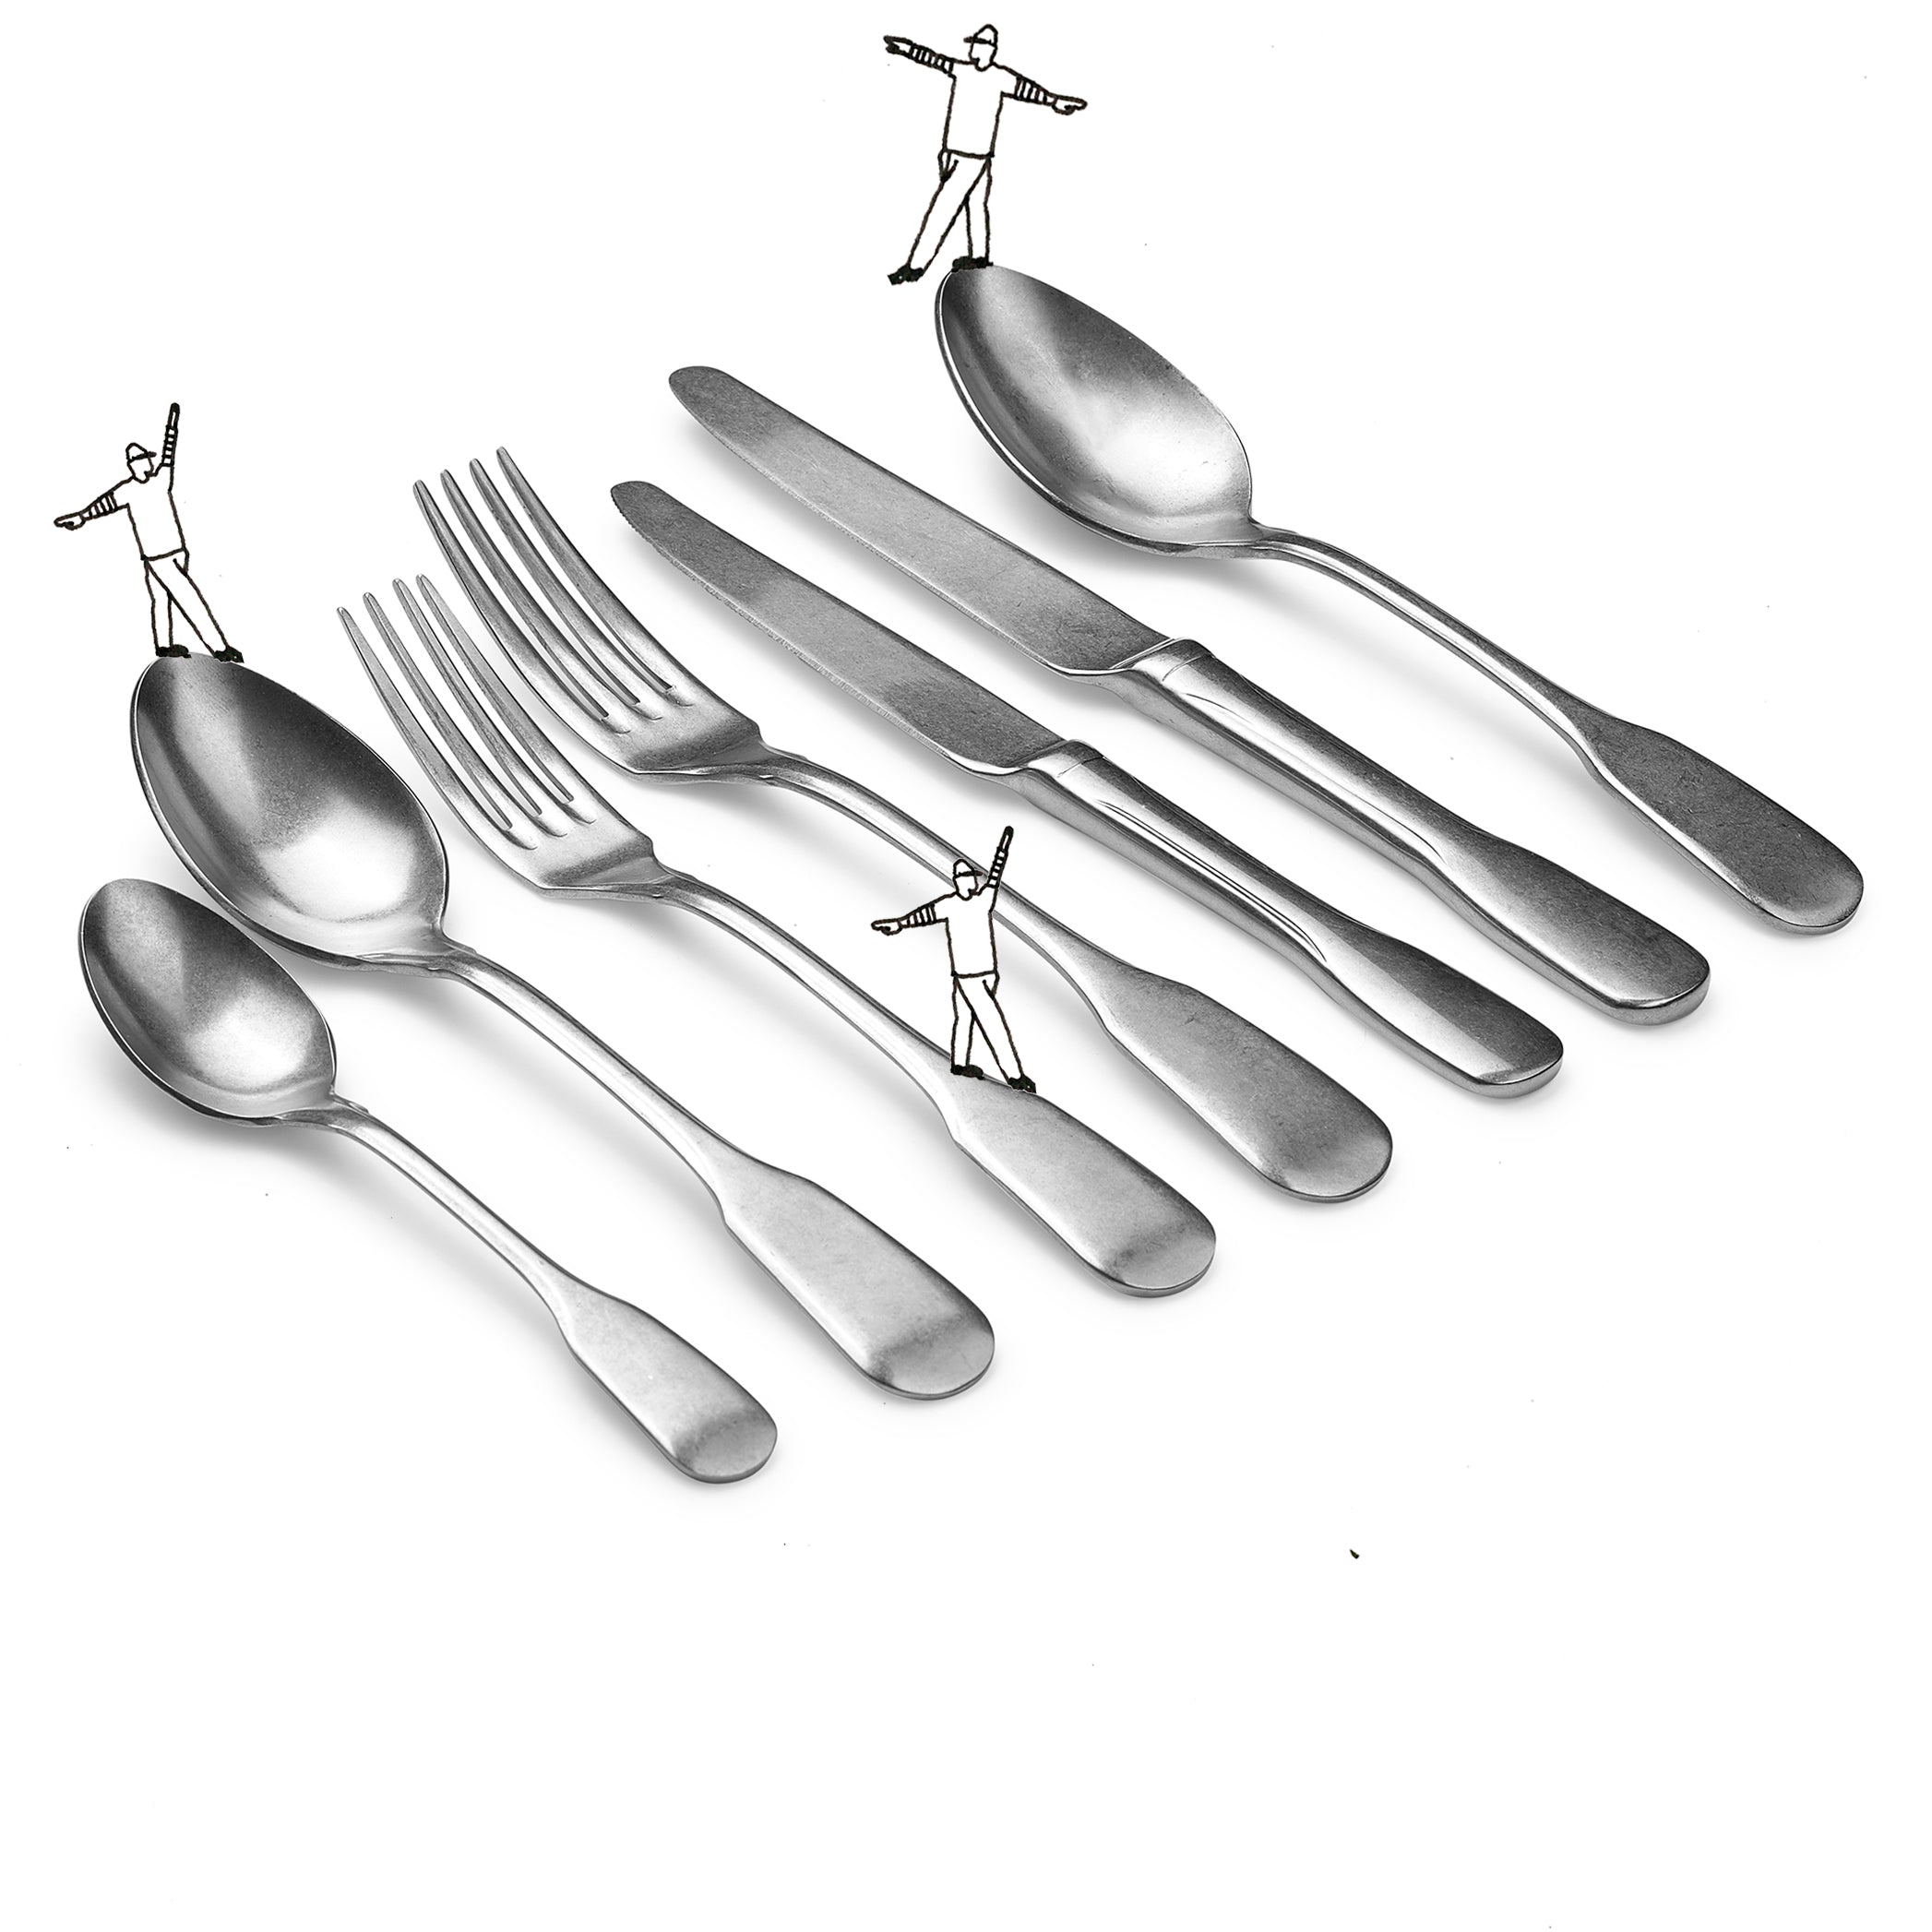 S&B 7 Piece Cutlery Set in Stainless Steel